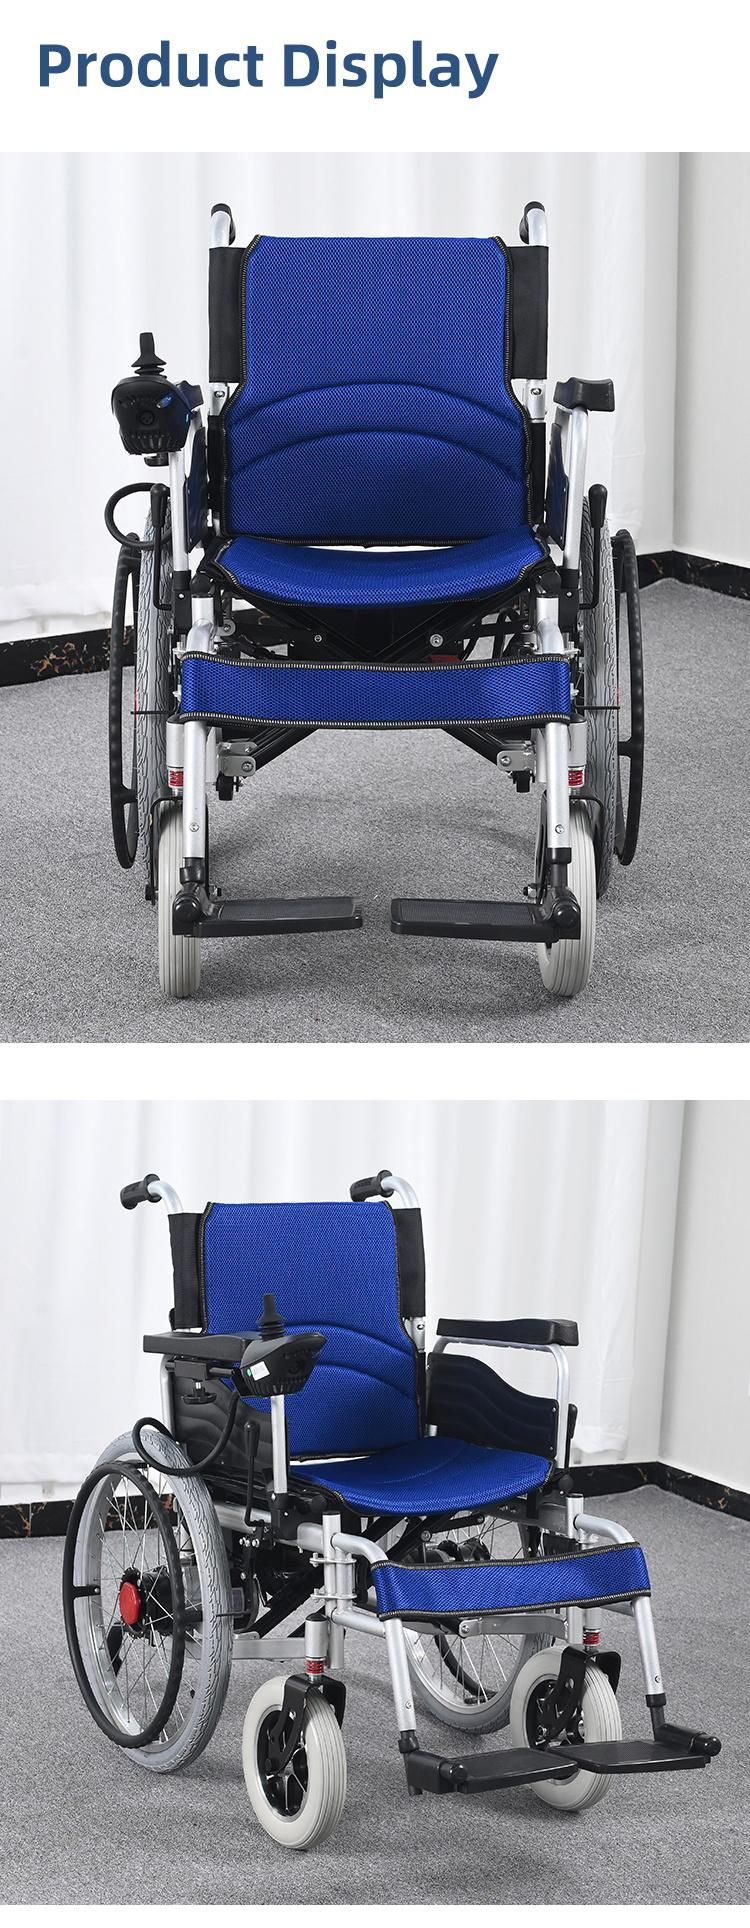 Electric Wheelchair Foldable Wheel Chair Portable for Elderly Care Products